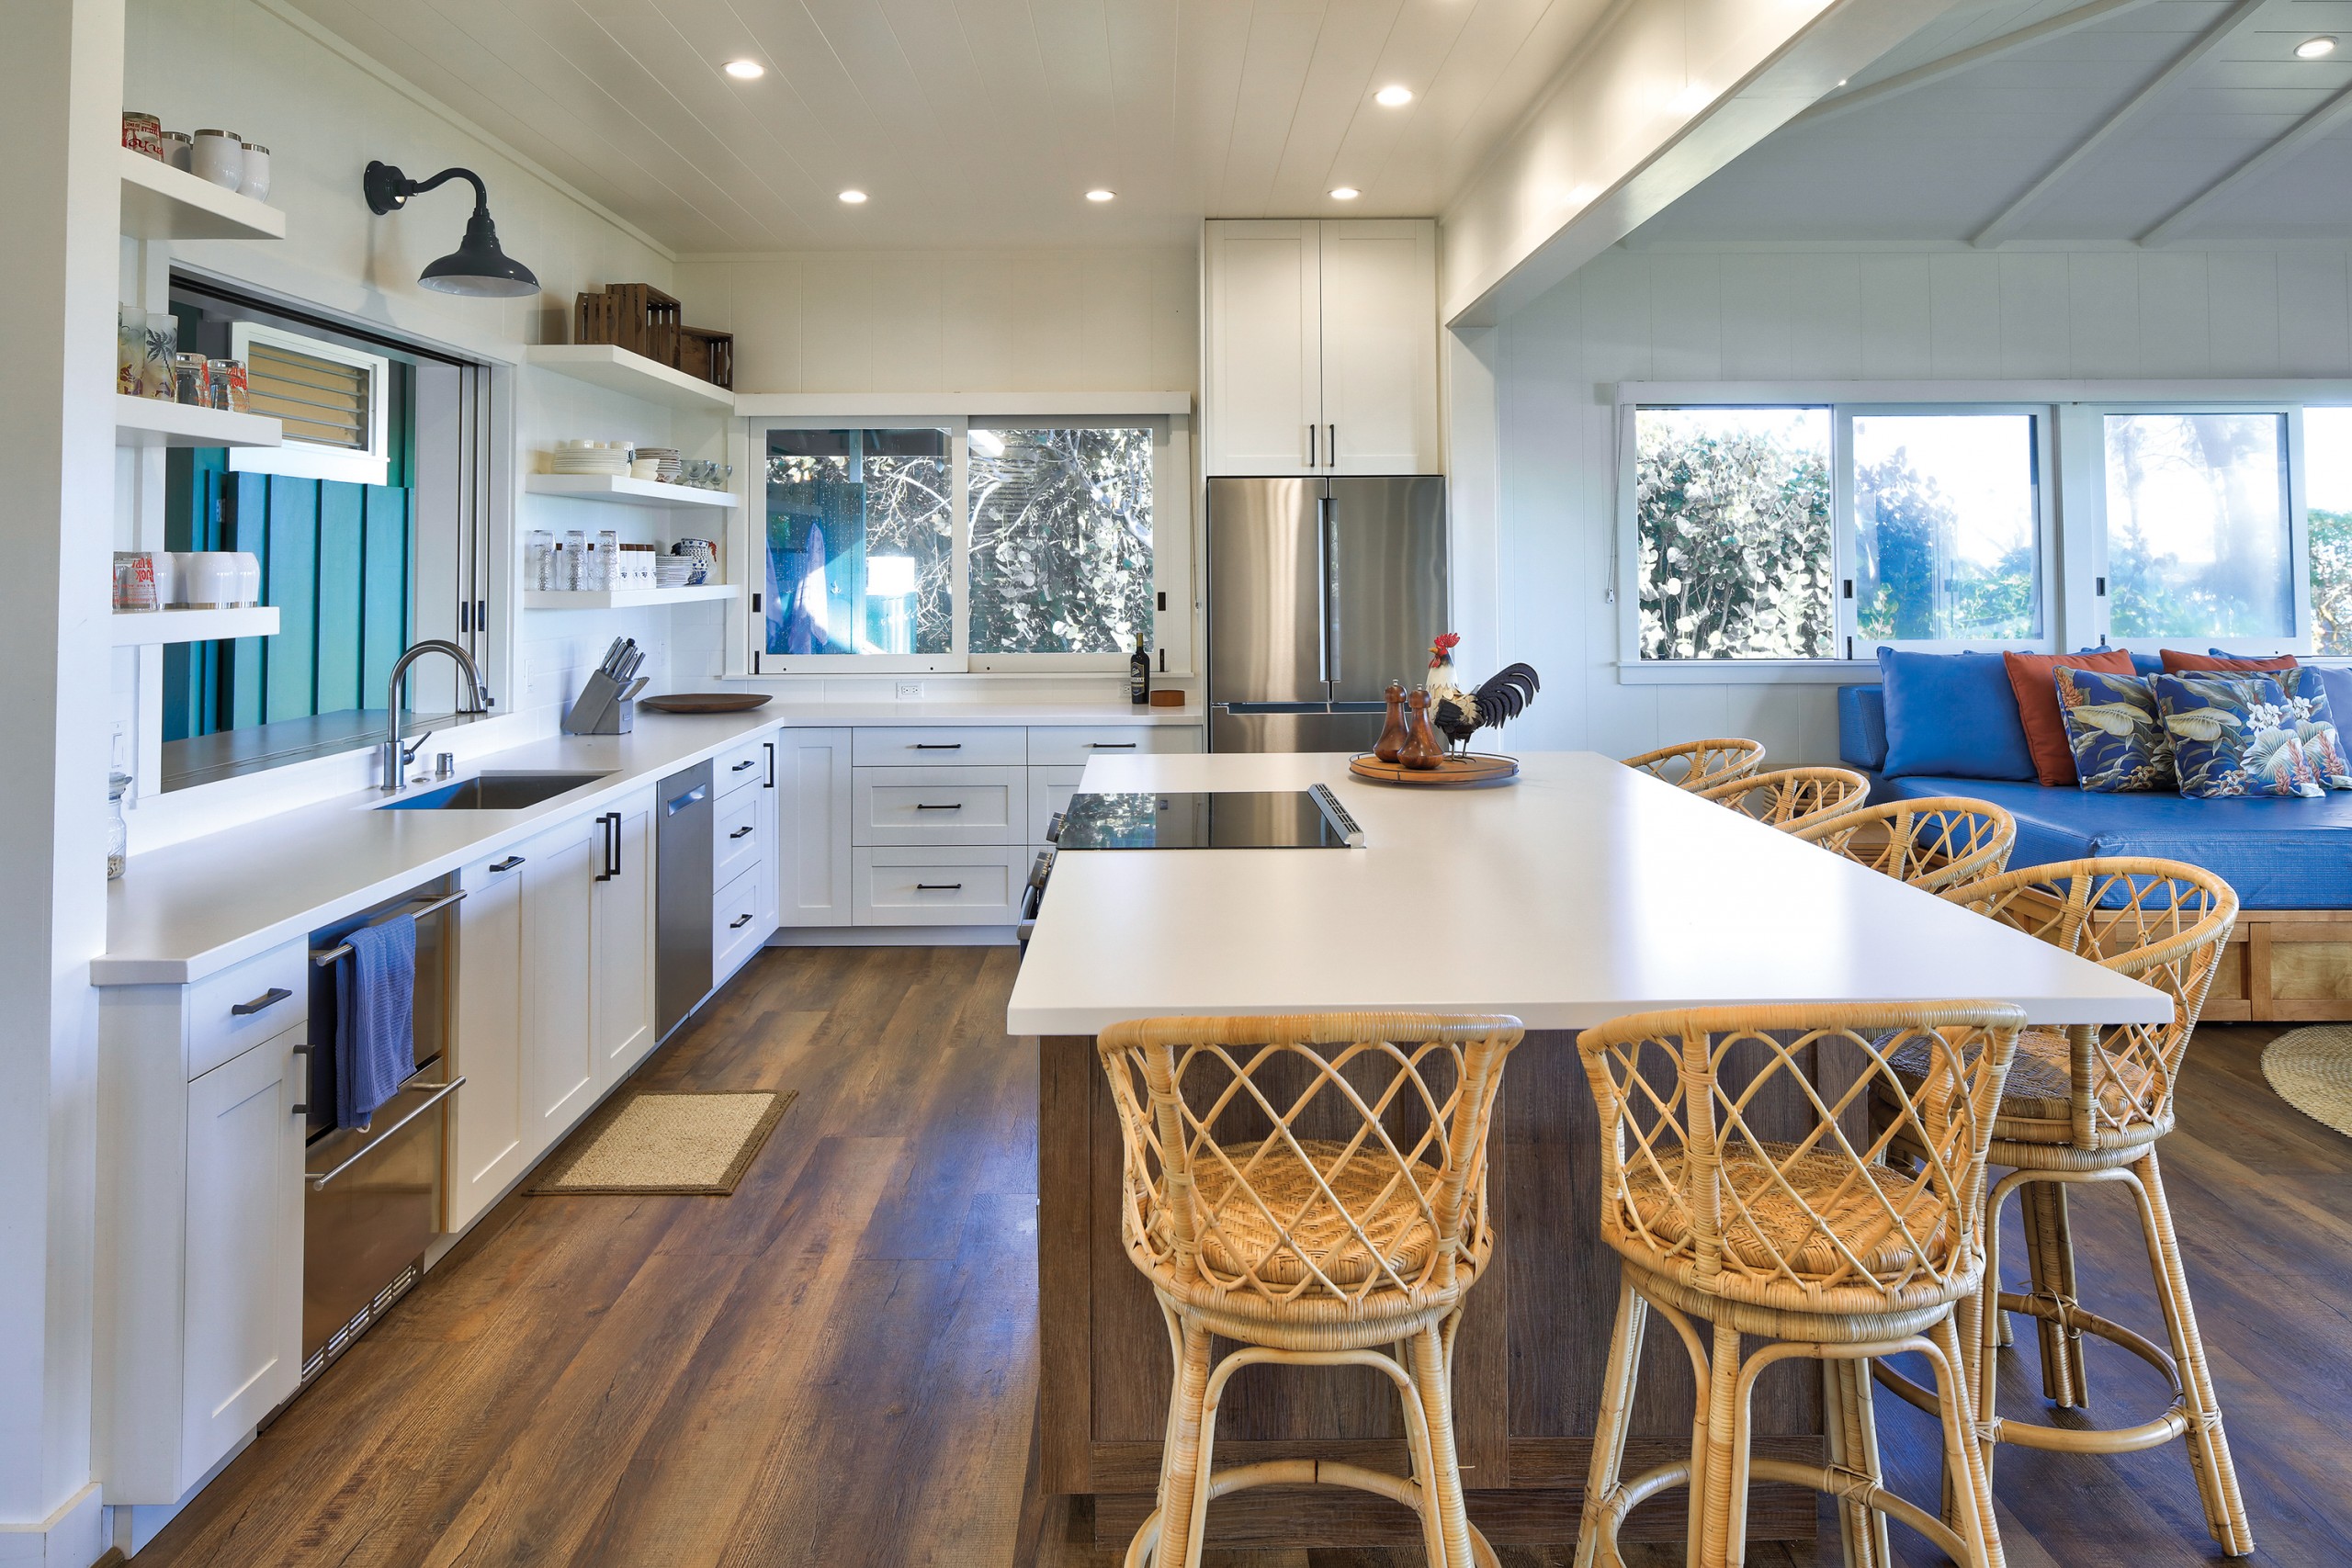 Hawaii Kitchen & Bath: 2023 Readers' Choice Cabinetry Supplier